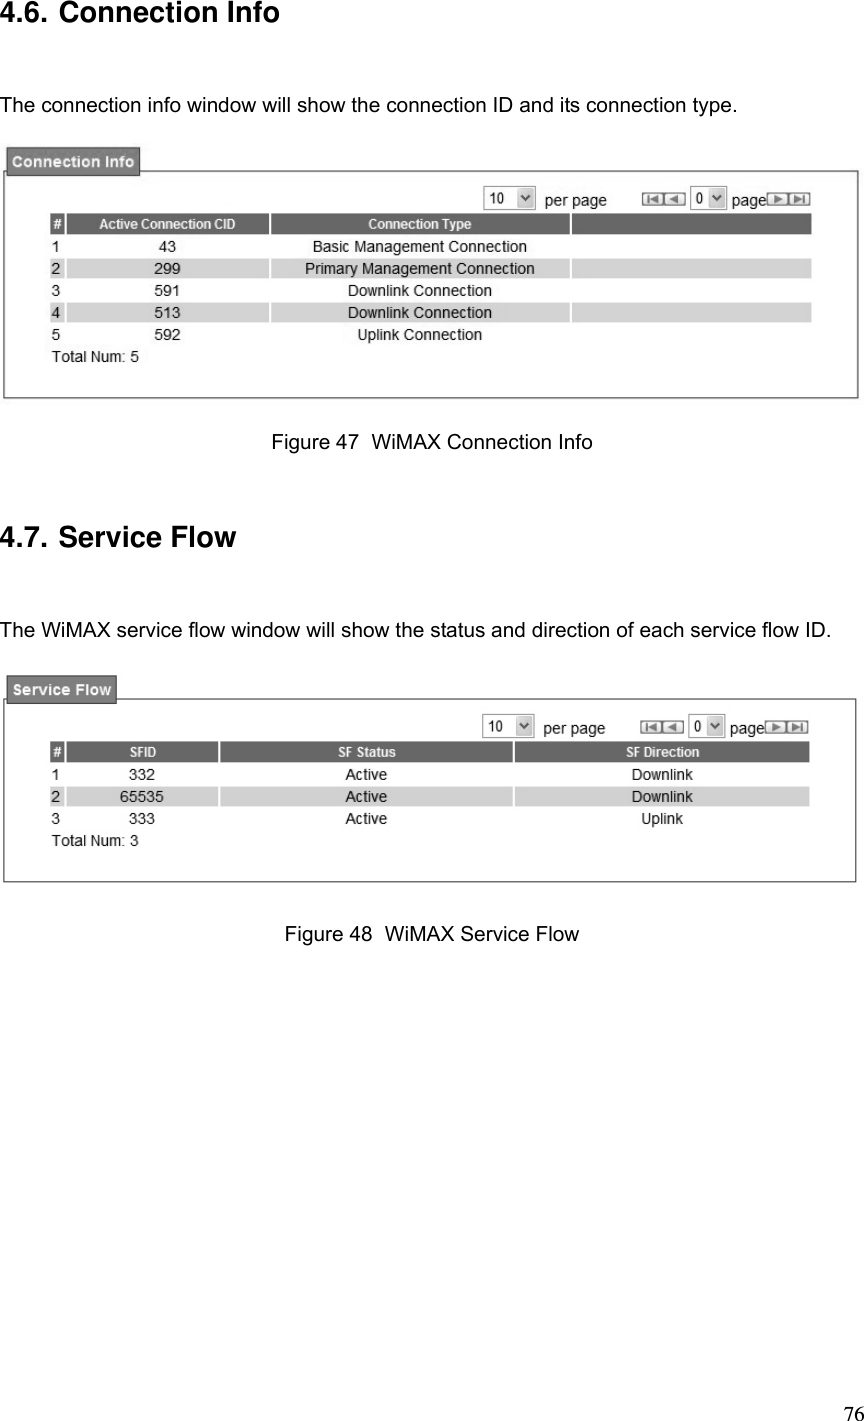  764.6. Connection Info The connection info window will show the connection ID and its connection type.  Figure 47 WiMAX Connection Info 4.7. Service Flow The WiMAX service flow window will show the status and direction of each service flow ID.  Figure 48  WiMAX Service Flow  